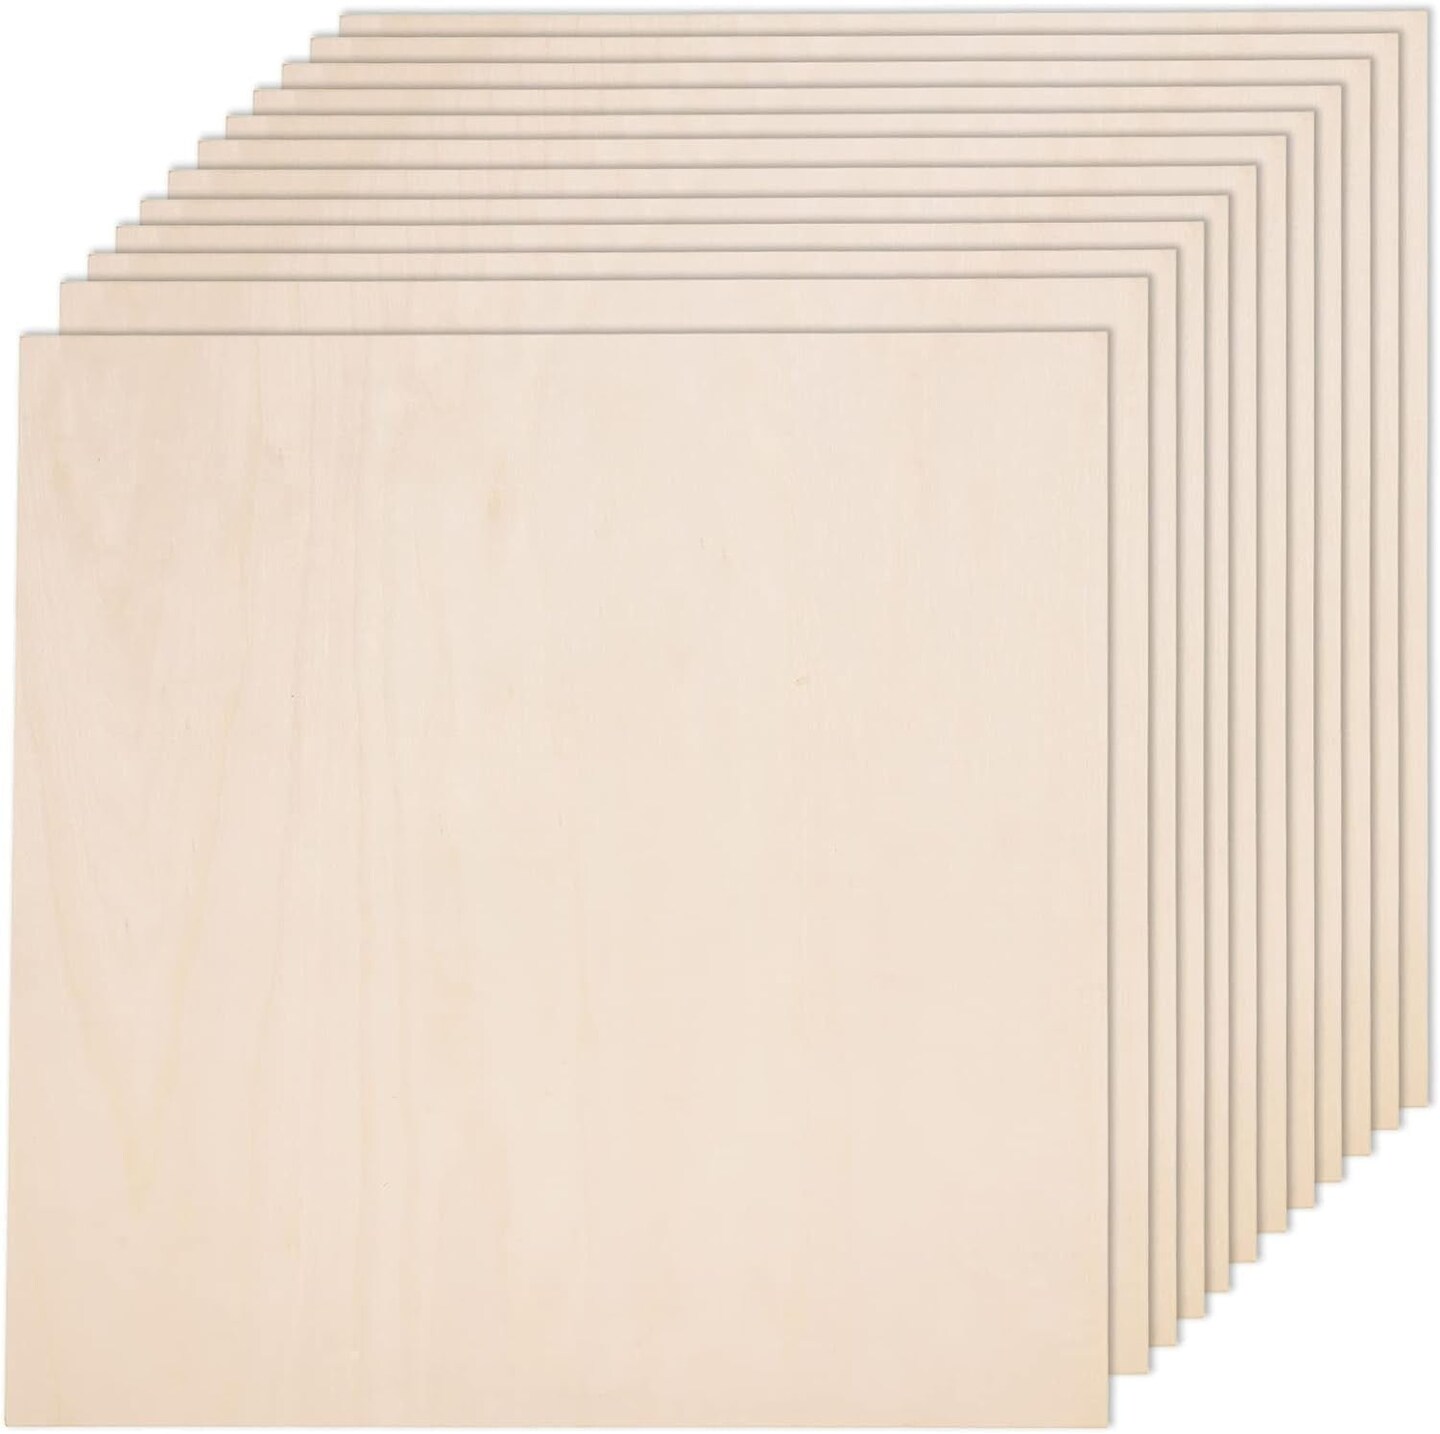 12 Pack Basswood Sheets for Crafts 12 X 4 X 1/8 Inch-3 Mm Thick Unfinished  Plywood Sheets Thin Craft Wood Sheets Boards for Drawing,Painting, Wood  Engraving, Wood Burning,Diy Laser Cutting Projects